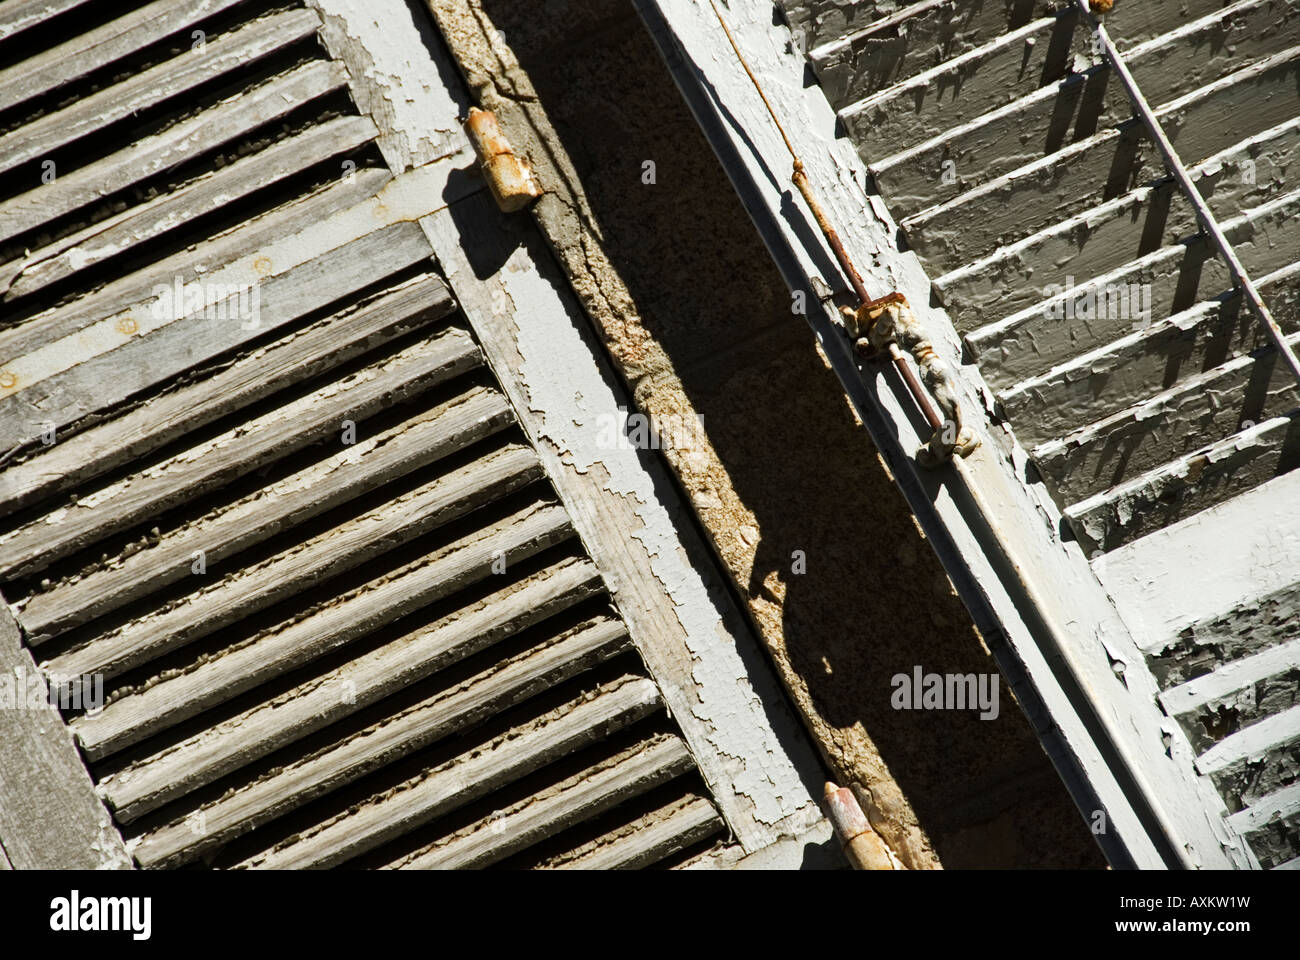 Stock photo of old wooden window shutters Stock Photo